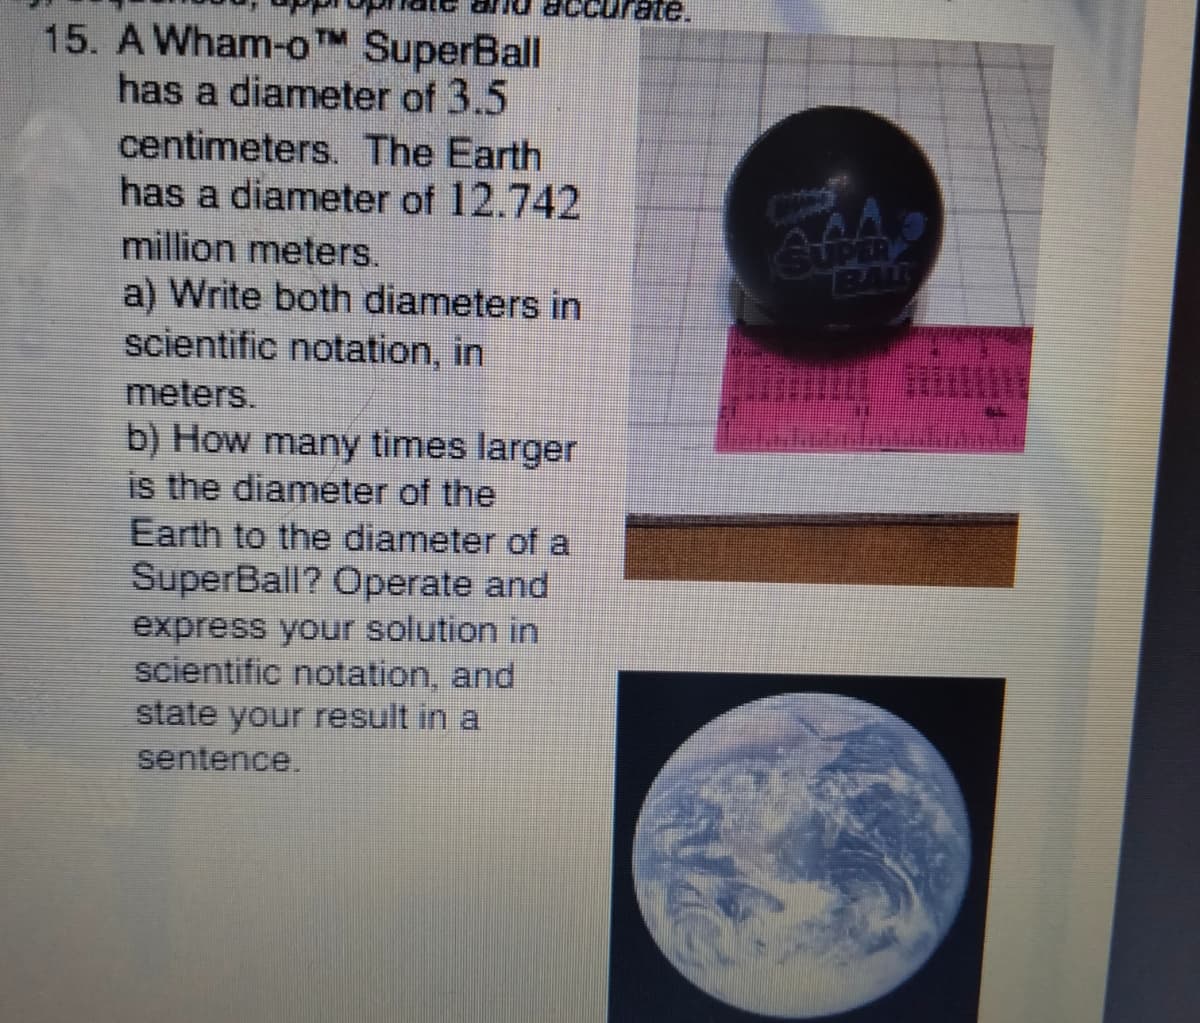 curate.
15. A Wham-oTM SuperBall
has a diameter of 3.5
centimeters. The Earth
has a diameter of 12.742
million meters.
BAL
a) Write both diameters in
scientific notation, in
meters.
b) How many times larger
is the diameter of the
Earth to the diameter of a
SuperBall? Operate and
express your solution in
scientific notation, and
state your result in a
sentence.
